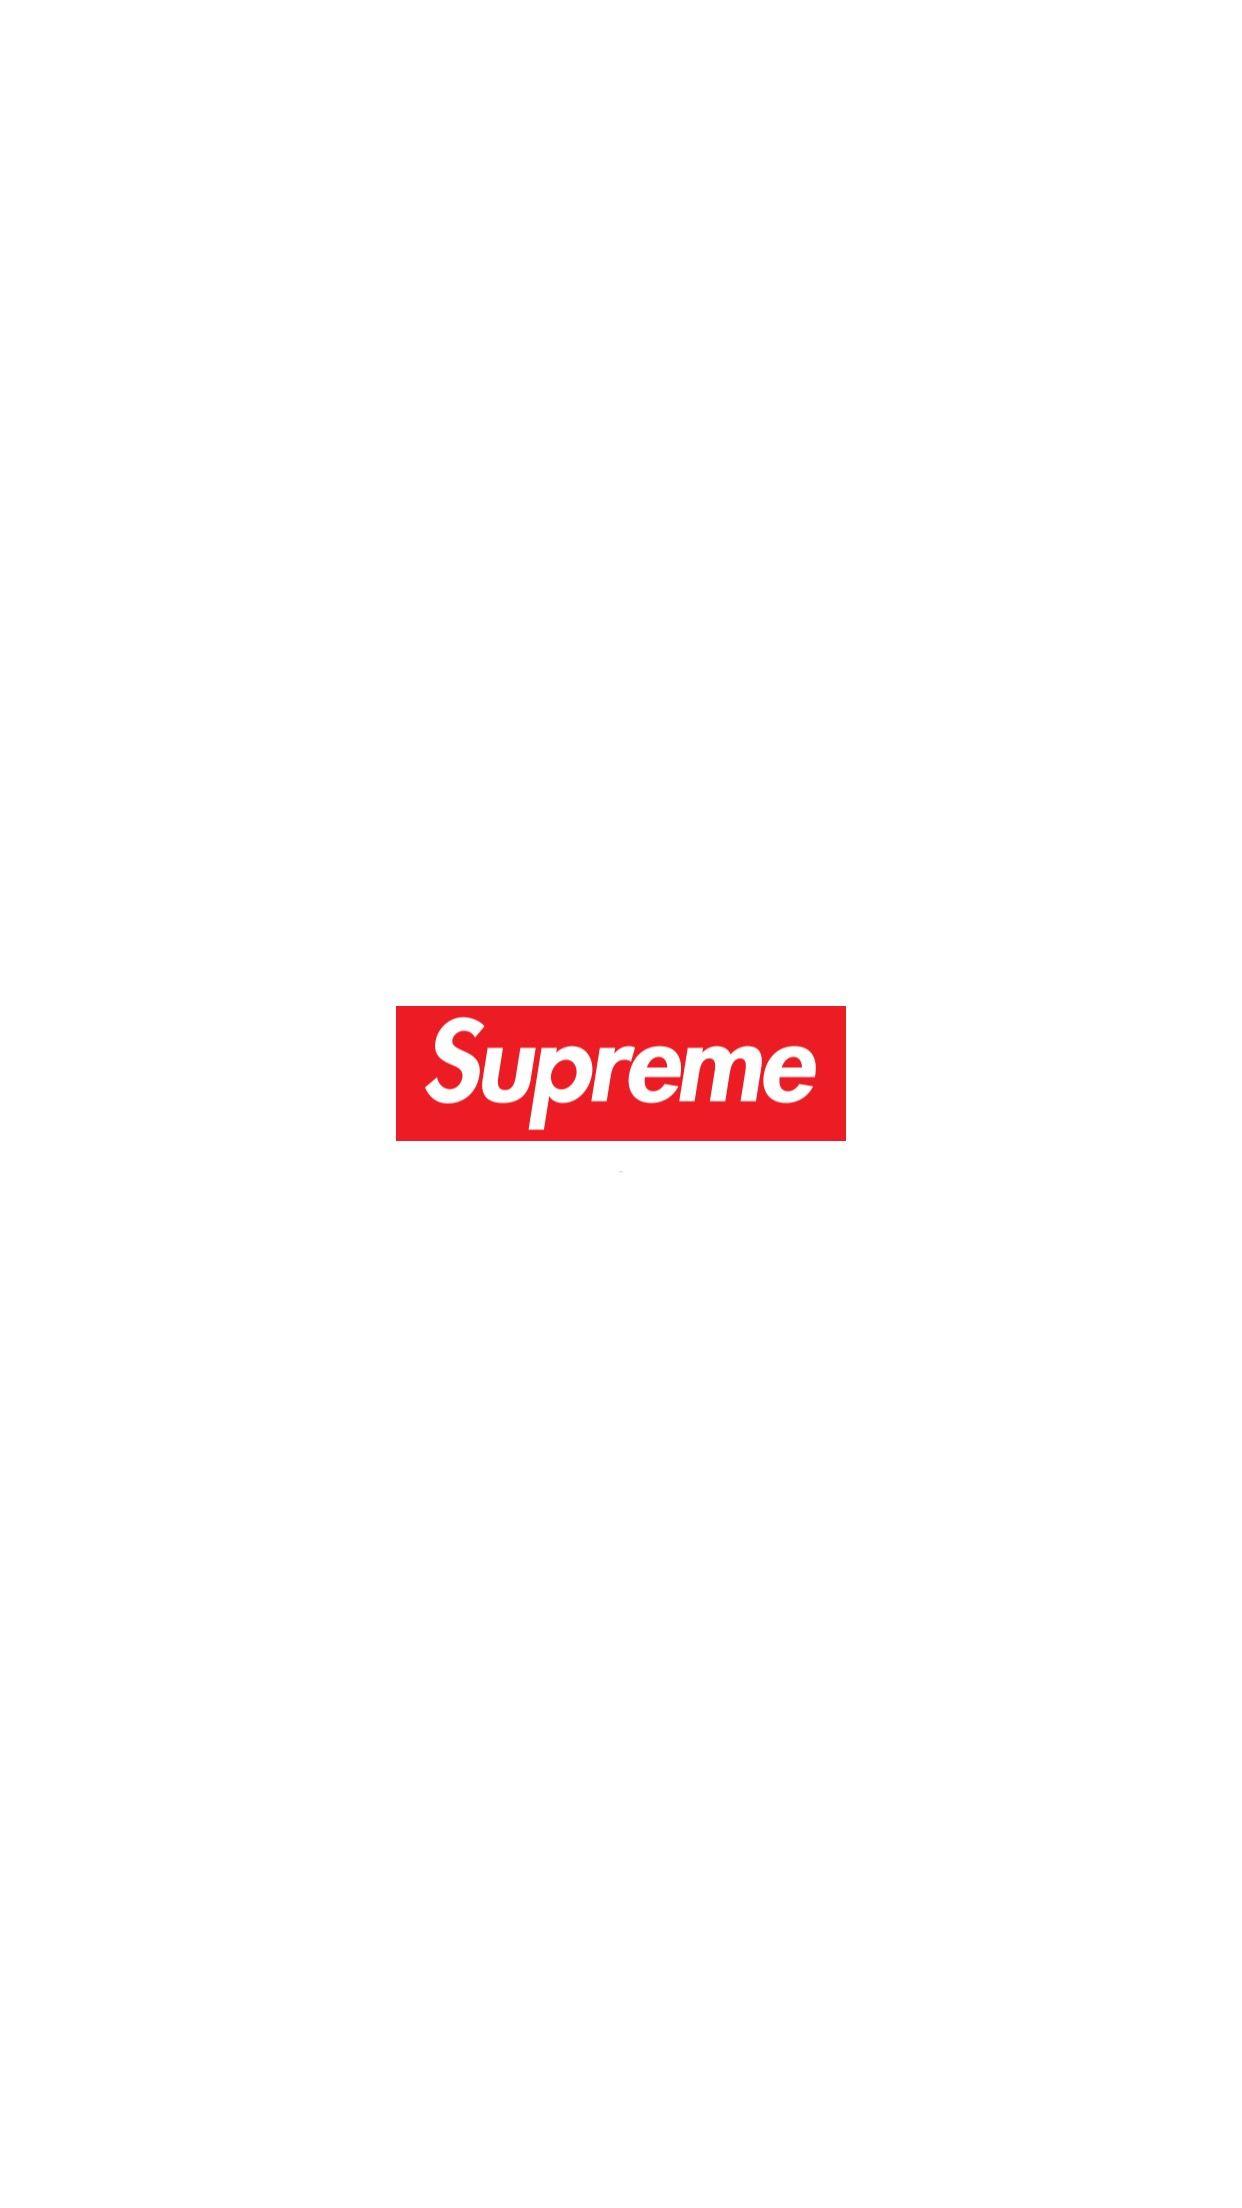 9 Best Supreme and Louis Vuitton ideas  hypebeast wallpaper, supreme  wallpaper, supreme iphone wallpaper